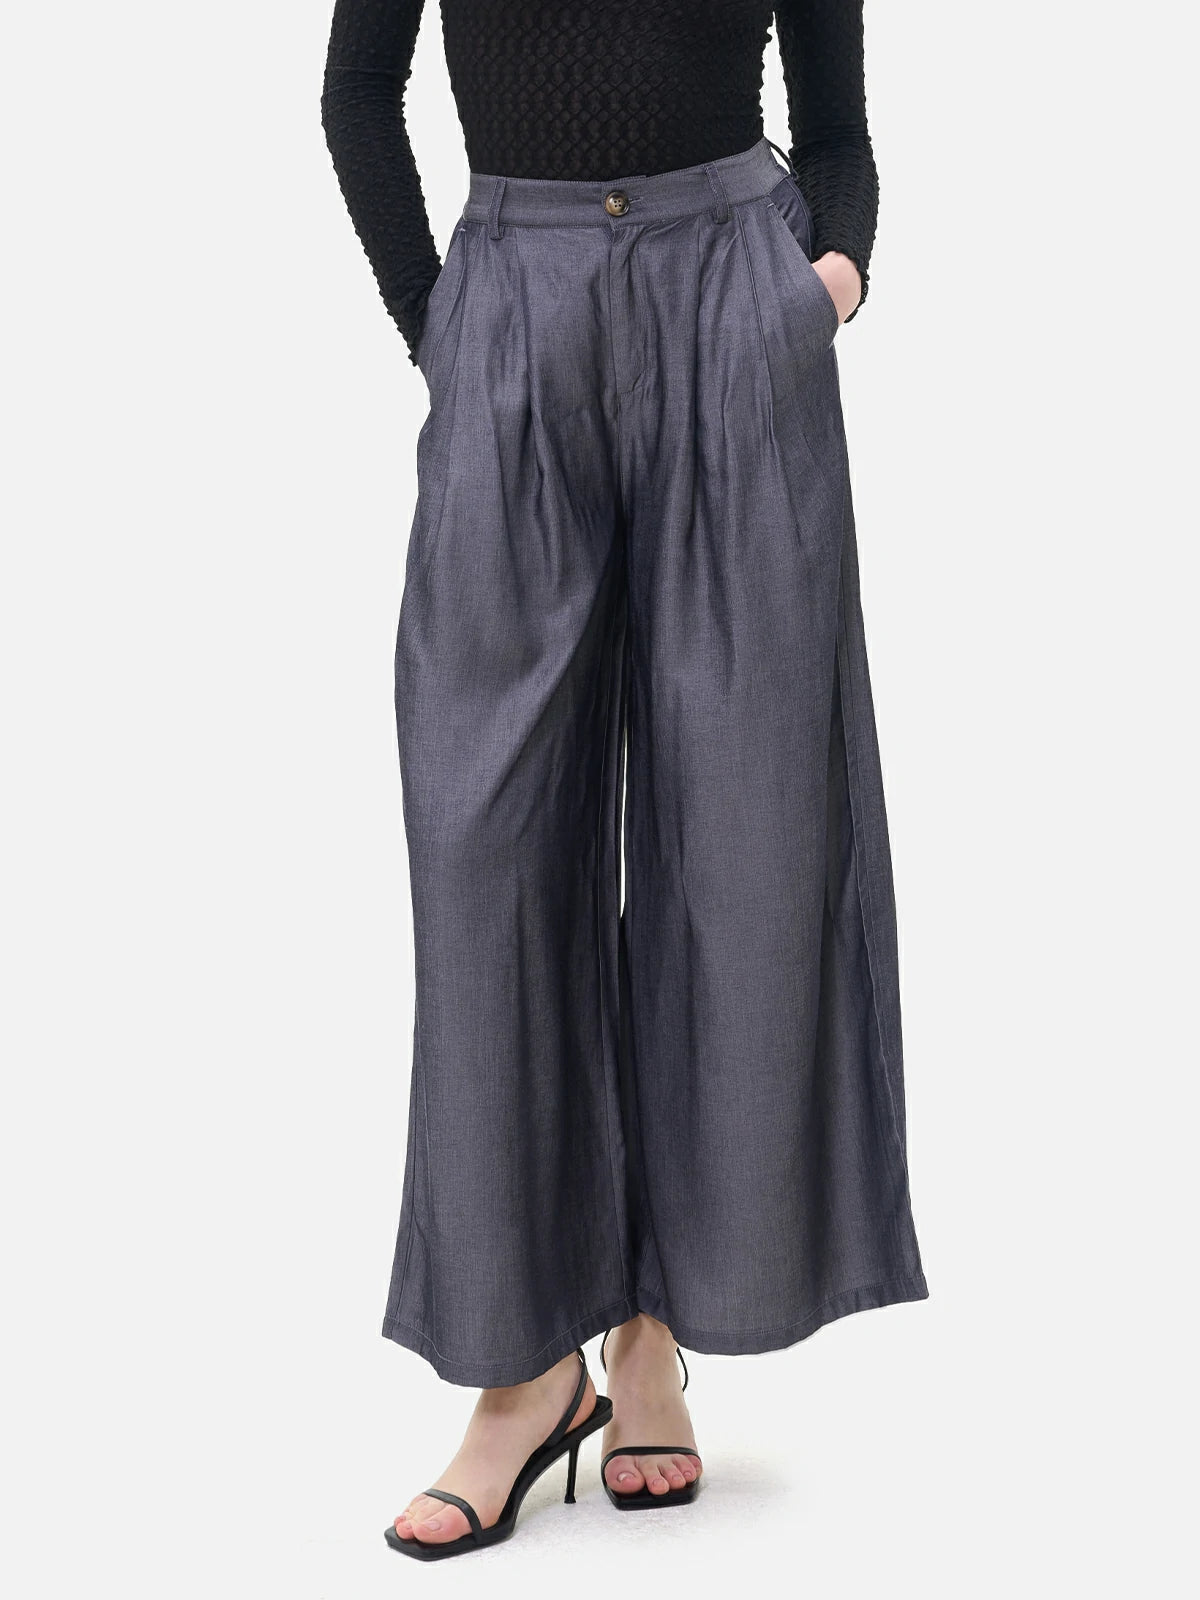 Stylish wide-leg trousers with elastic back waist for comfortable wear